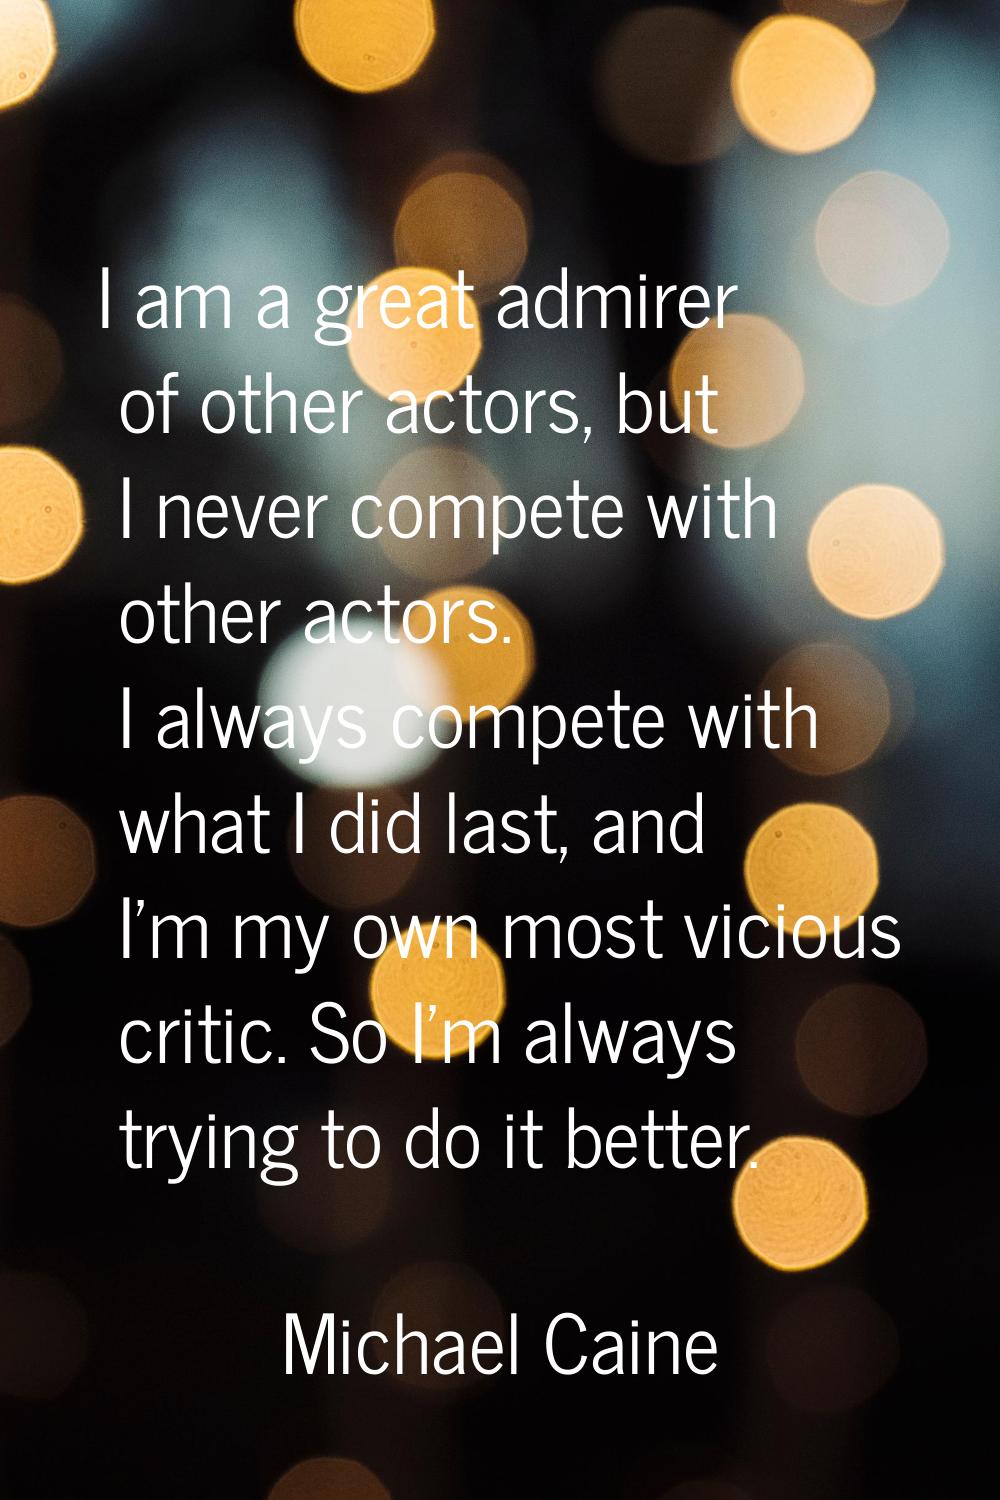 I am a great admirer of other actors, but I never compete with other actors. I always compete with 